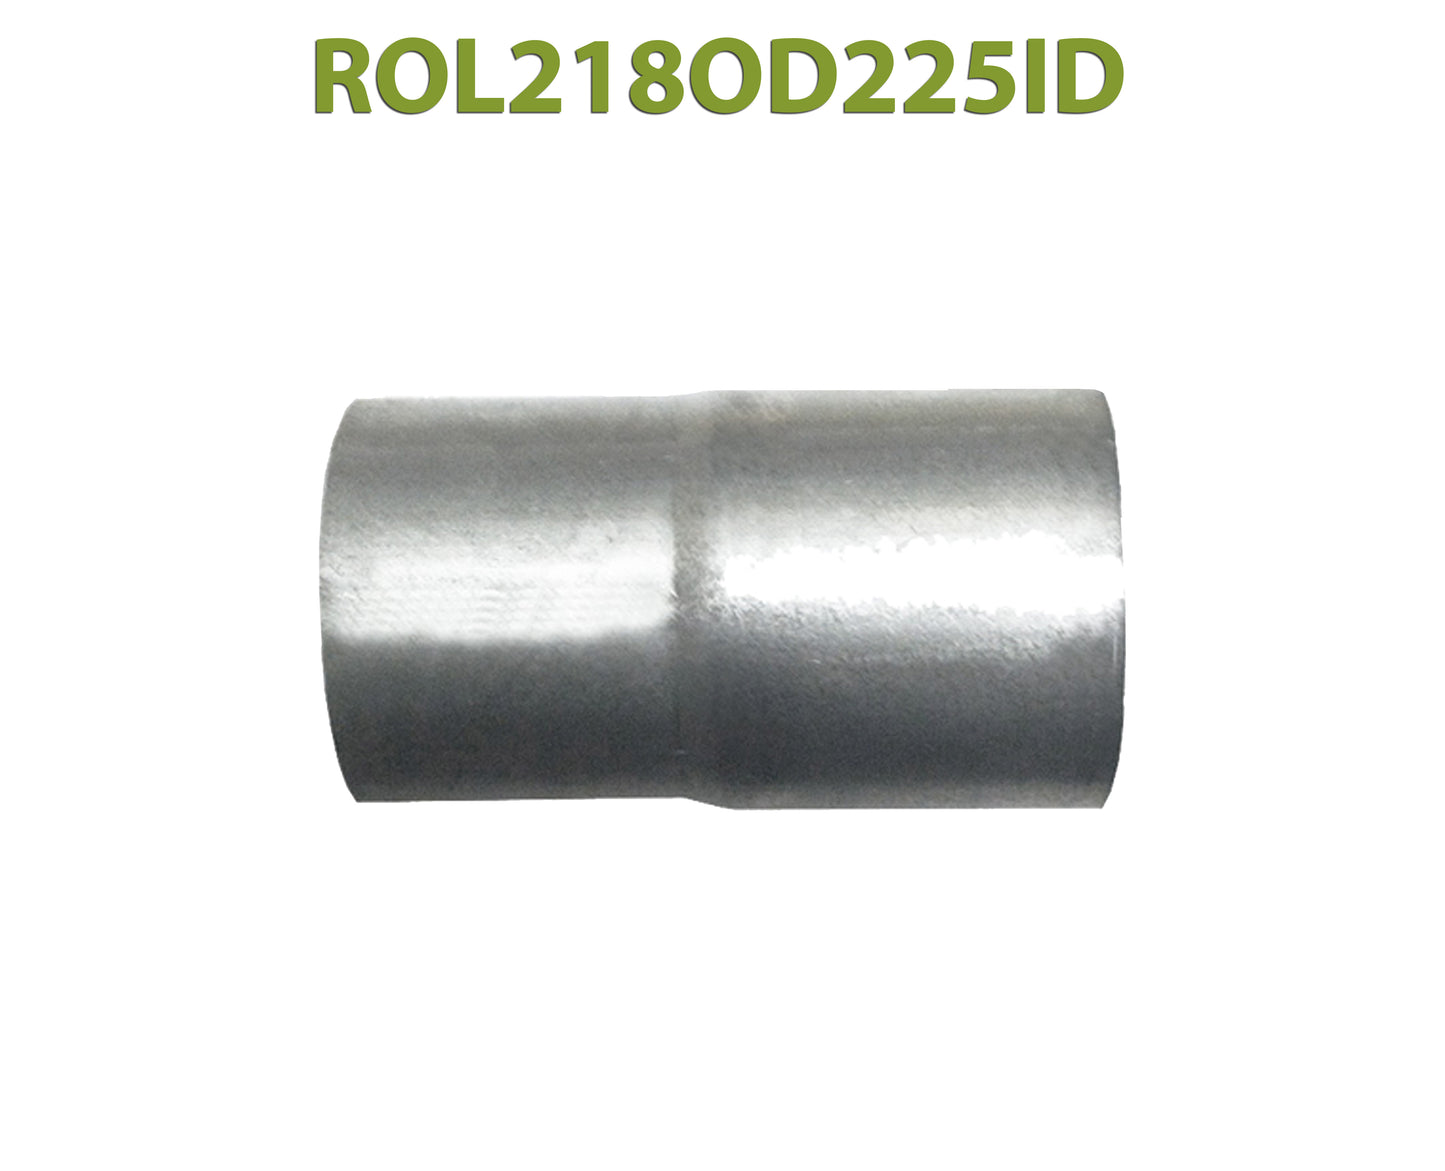 ROL218OD225ID 548521 2 1/8” OD to 2 1/4” ID Universal Exhaust Component to Pipe Adapter Reducer